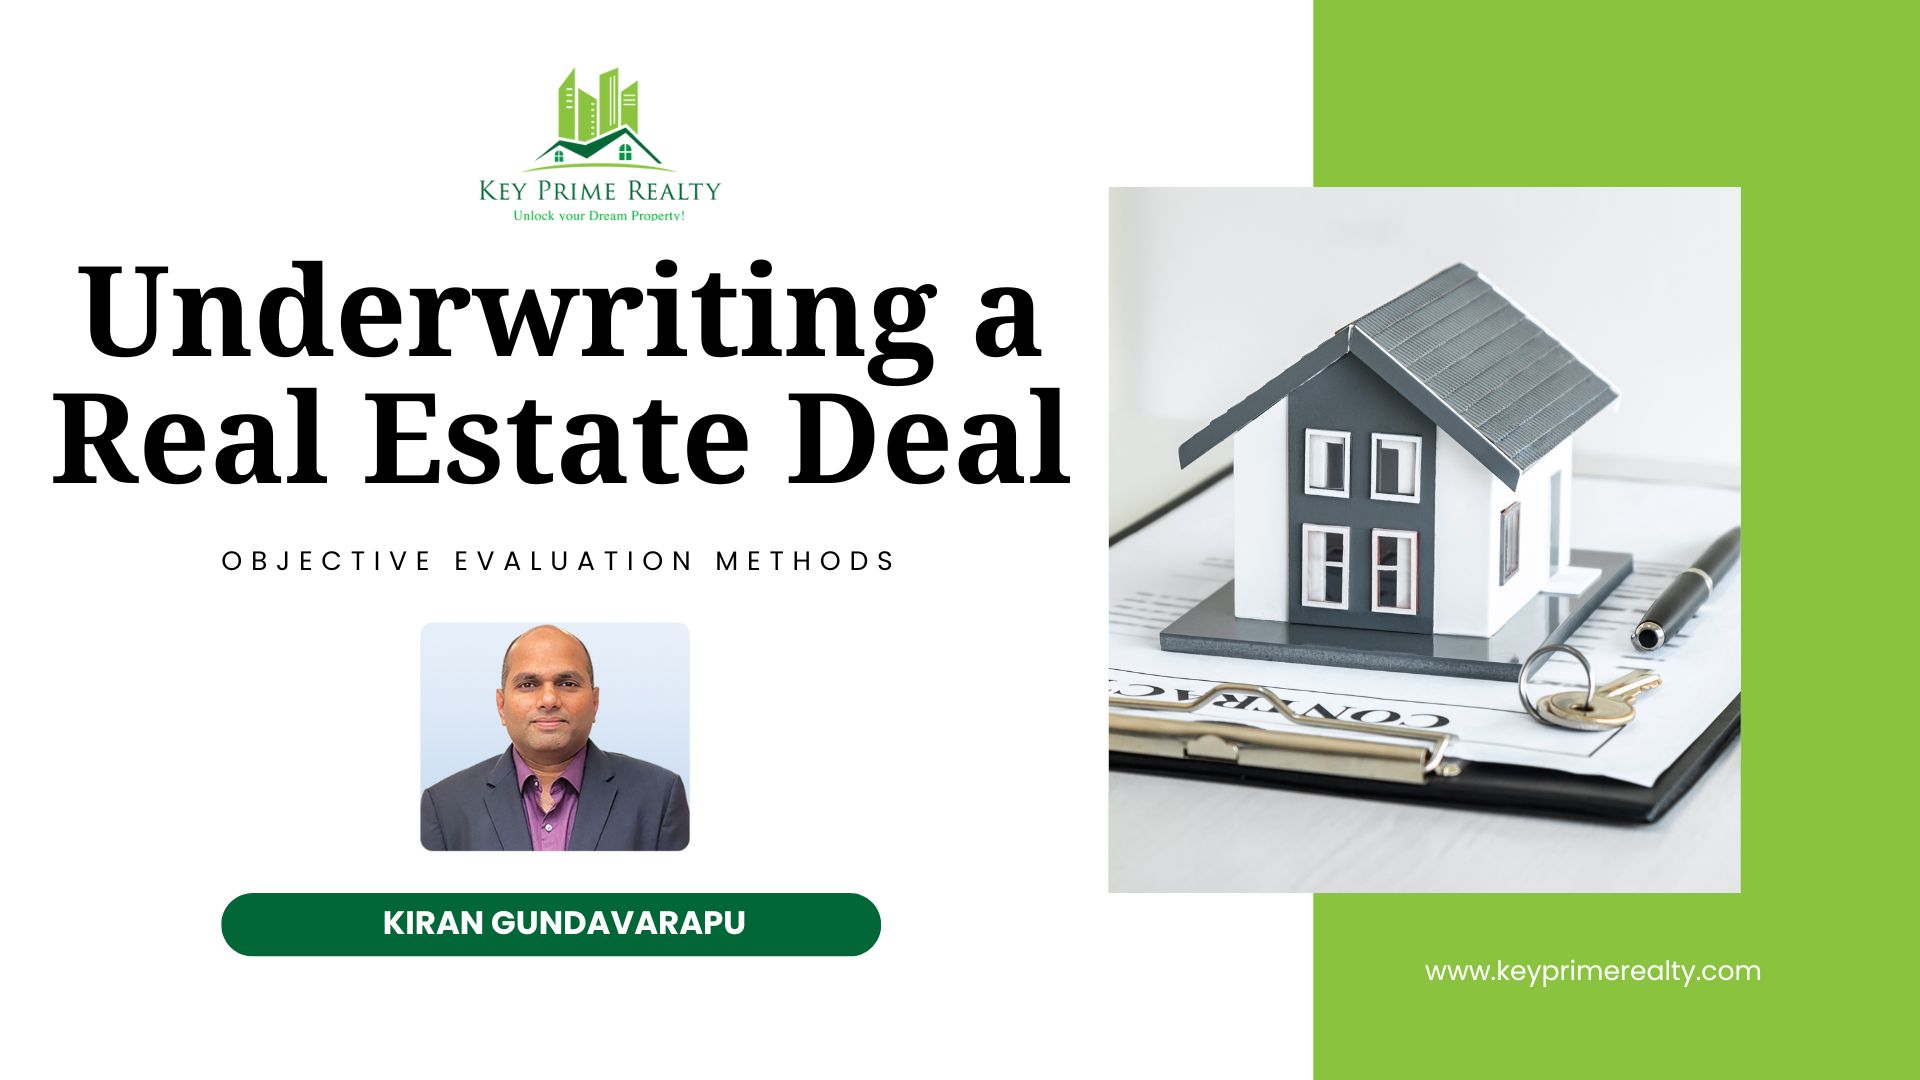 Underwriting ( Evaluating ) a Real Estate Deal